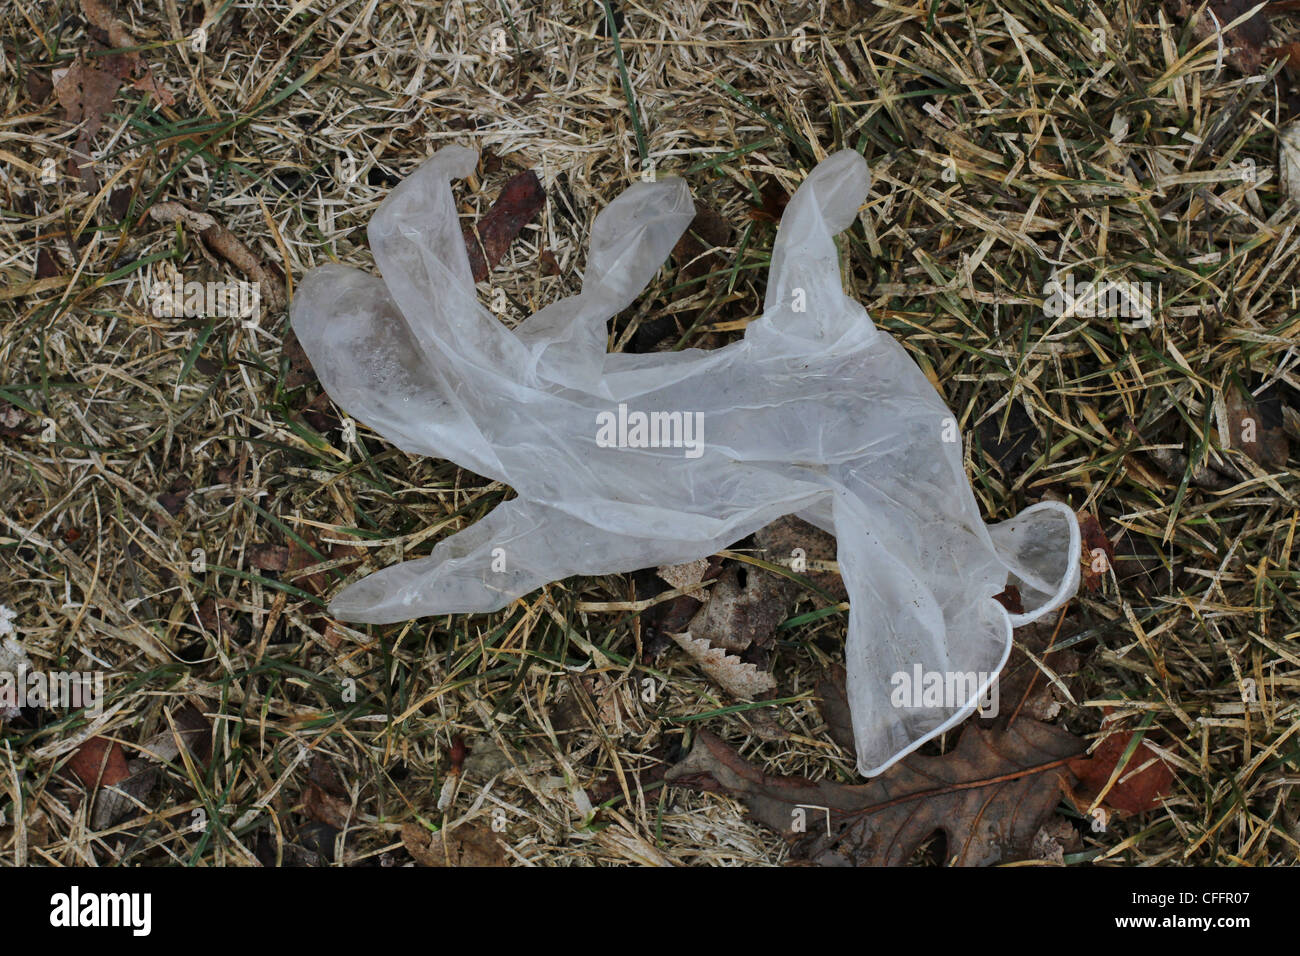 A  discarded latex glove lying on the ground. Stock Photo